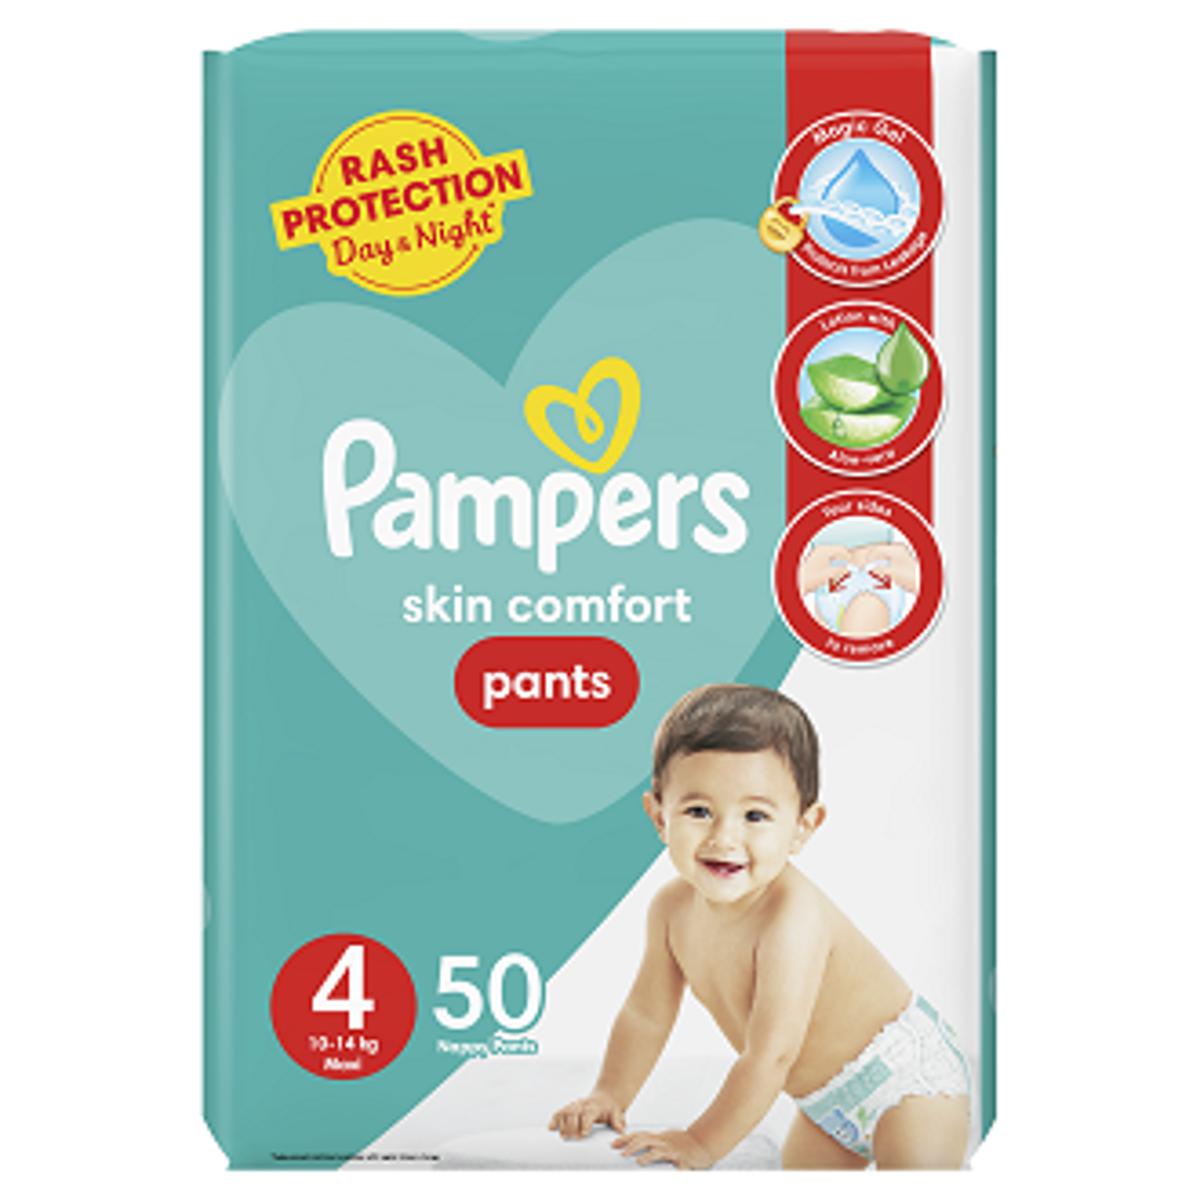 Pampers Pants Baby Diapers (Size 4 Large 50 Pcs)